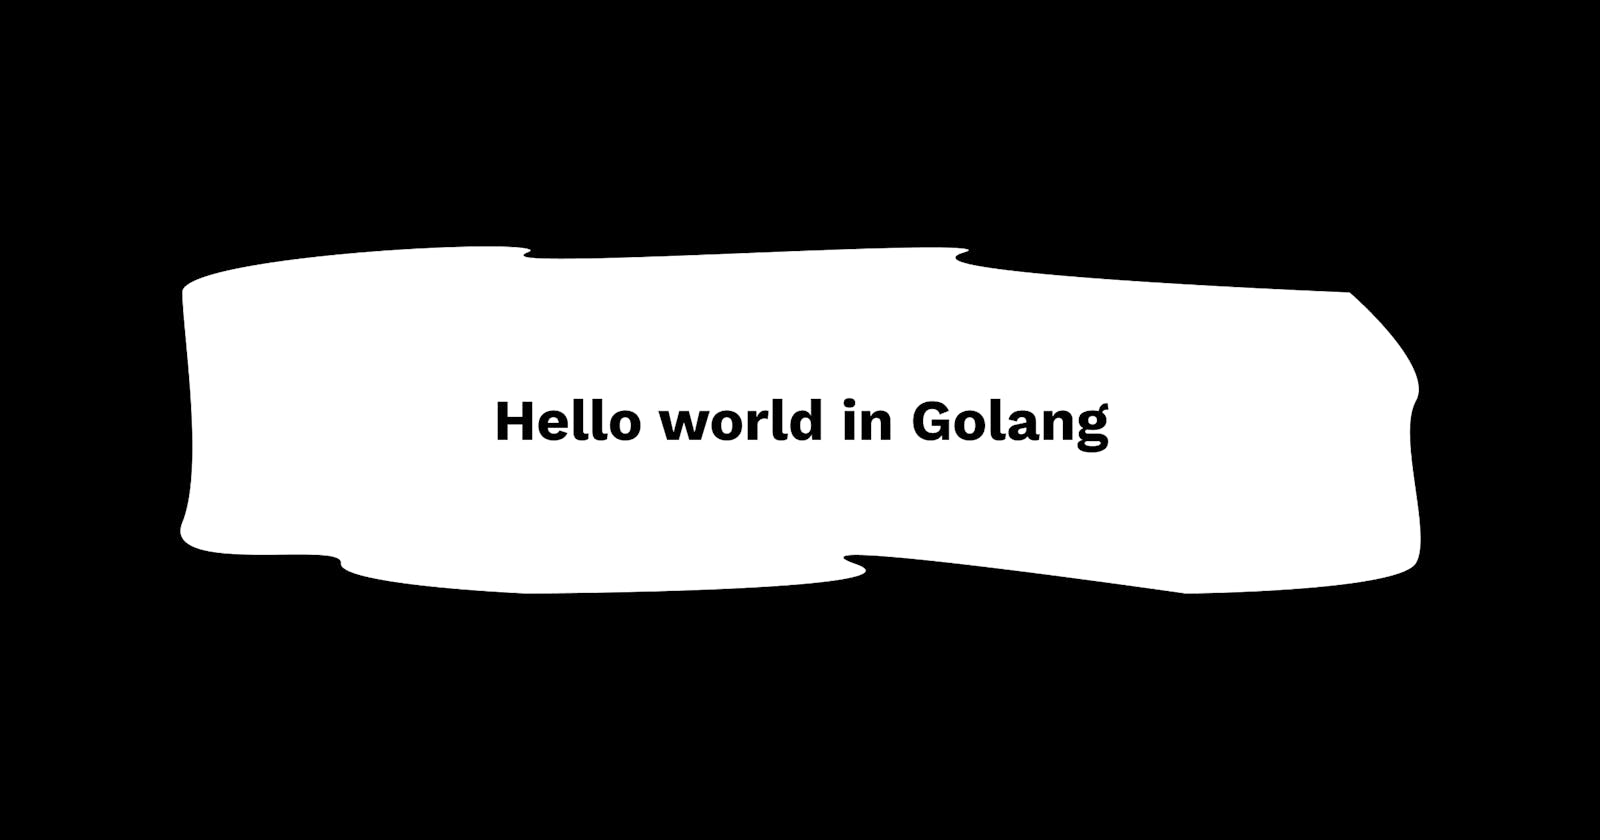 Hello world in Golang